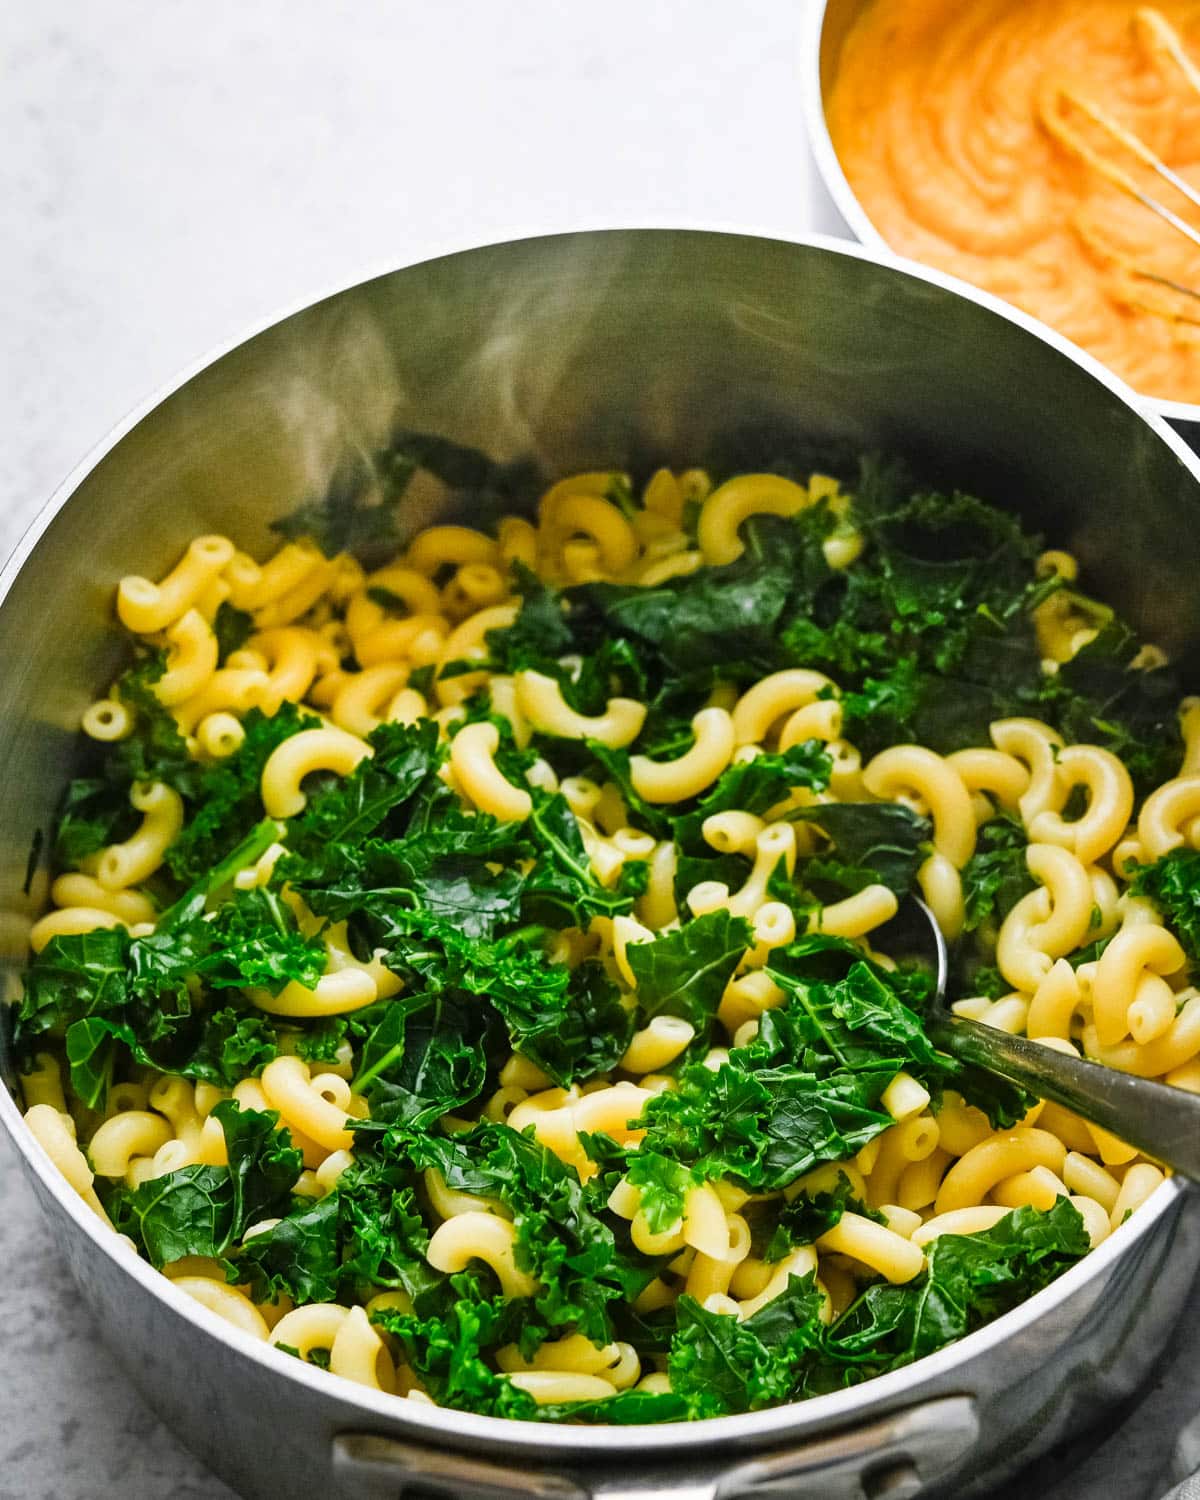 After straining the kale and macaroni, add them back to the pot.